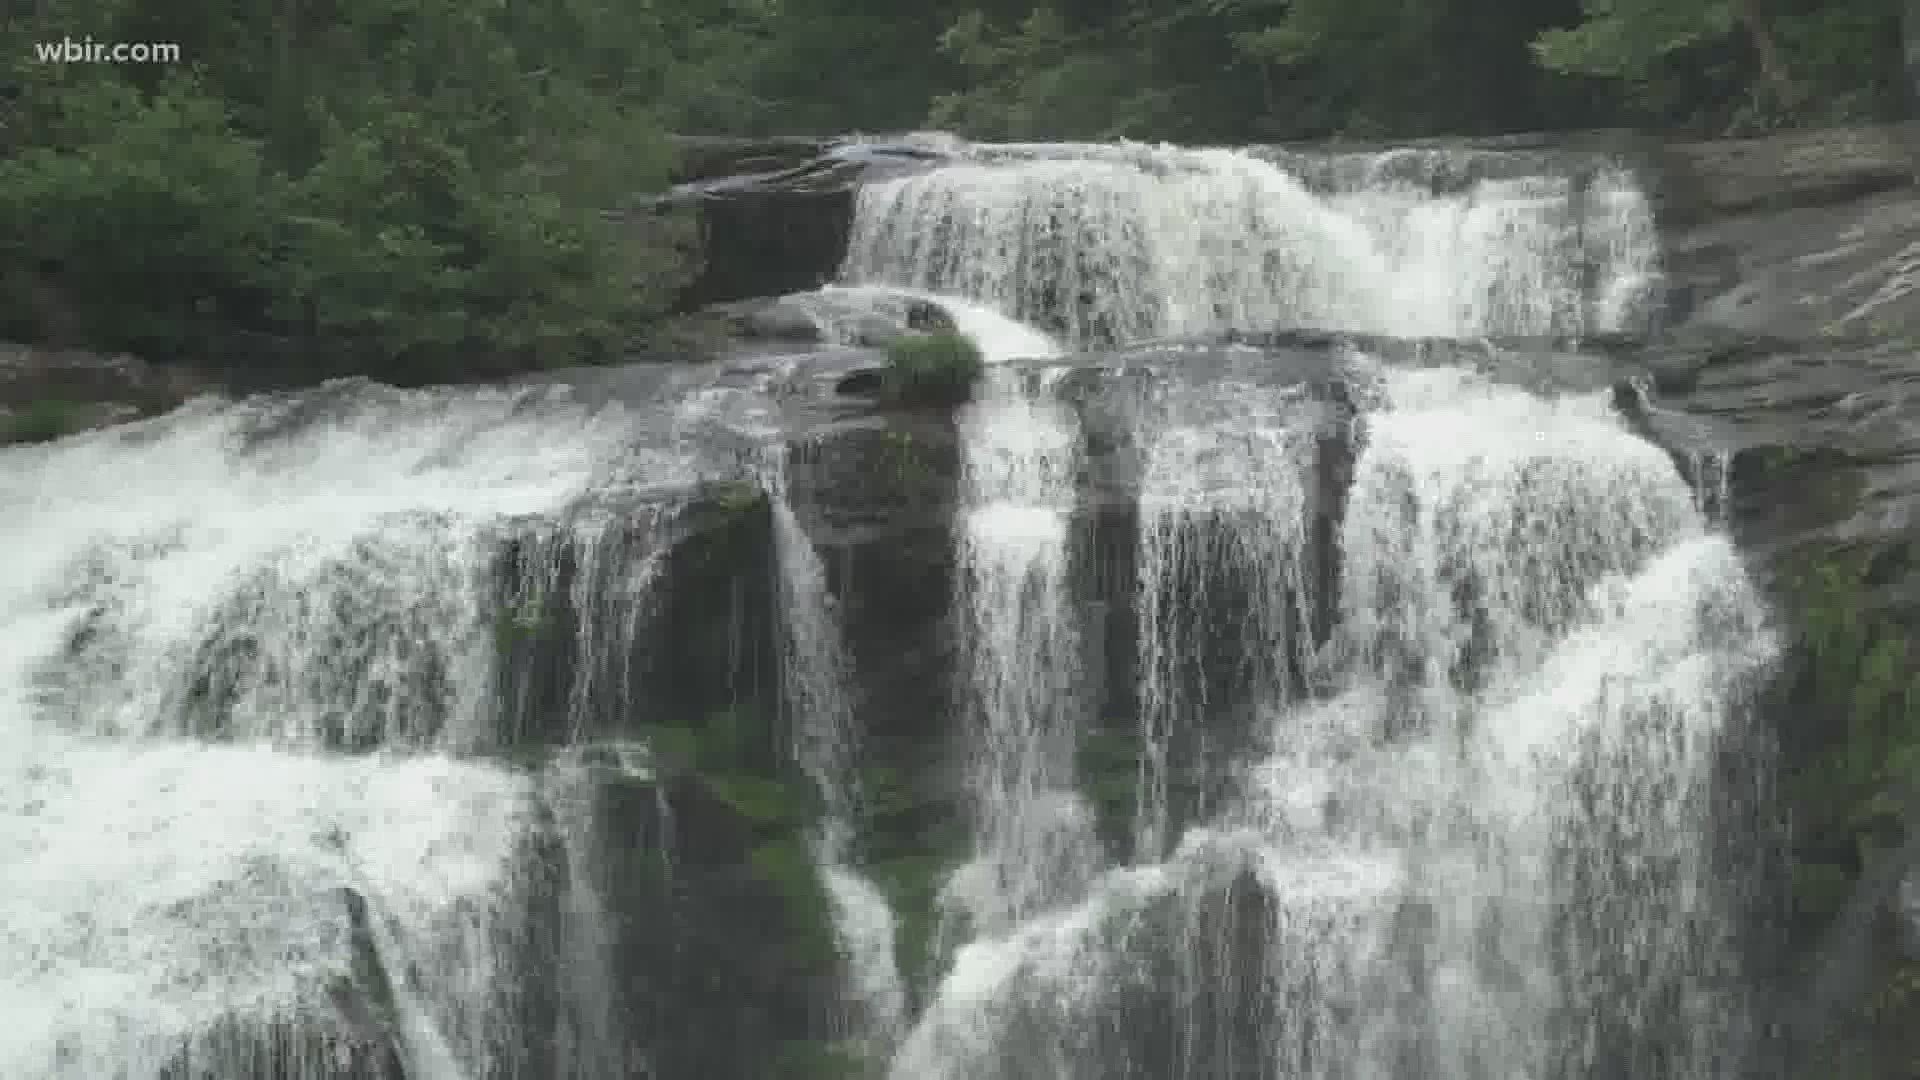 Covenant Health Fitness expert Missy Kane shows off all the fun (and cooler) activities you can do up at Bald River Falls in Monroe County. July 20, 2020-4pm.